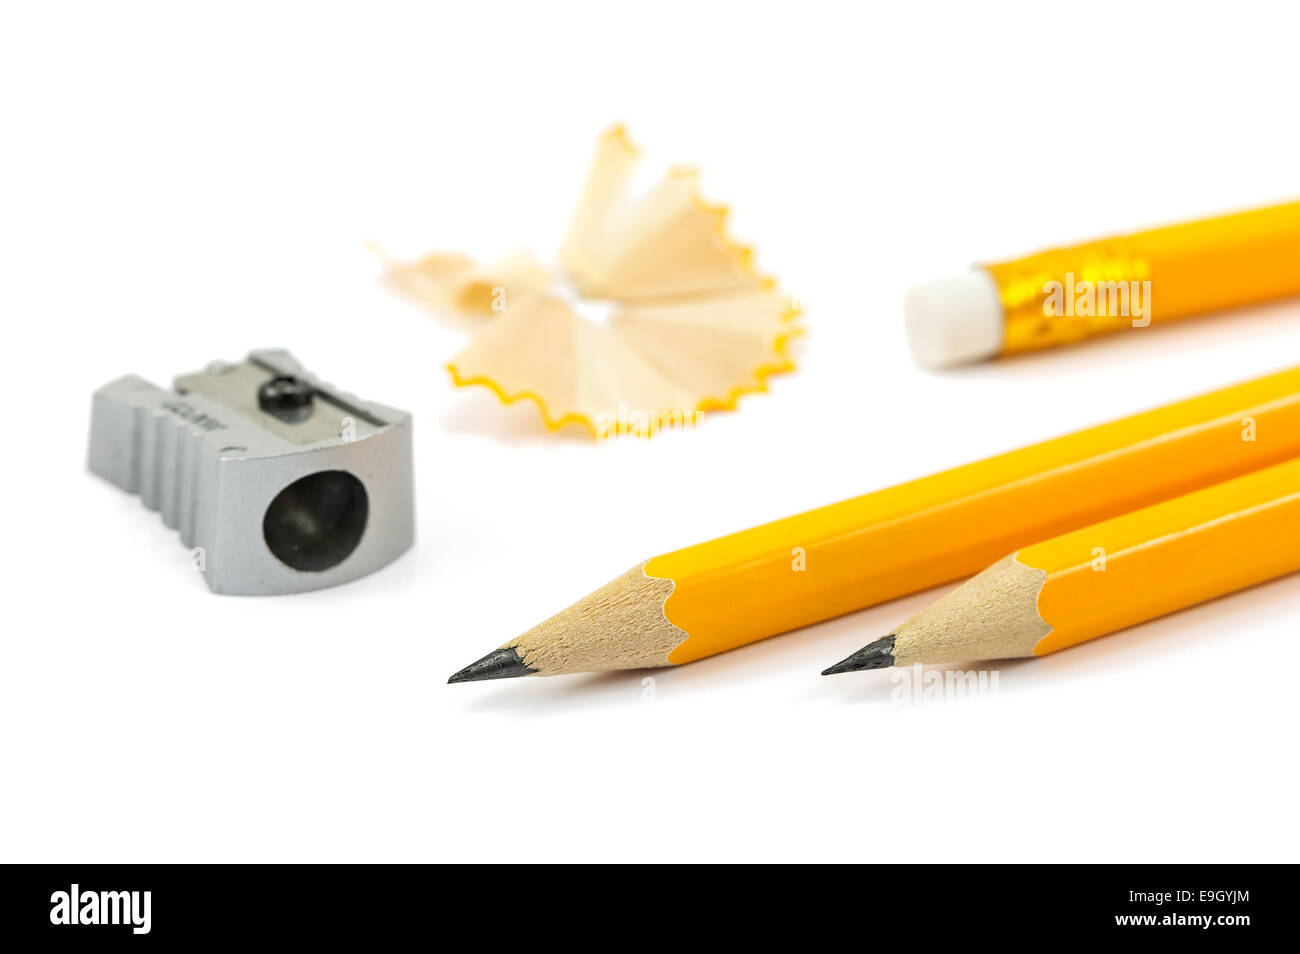 Pencils and sharpener isolated on a white background Stock Photo